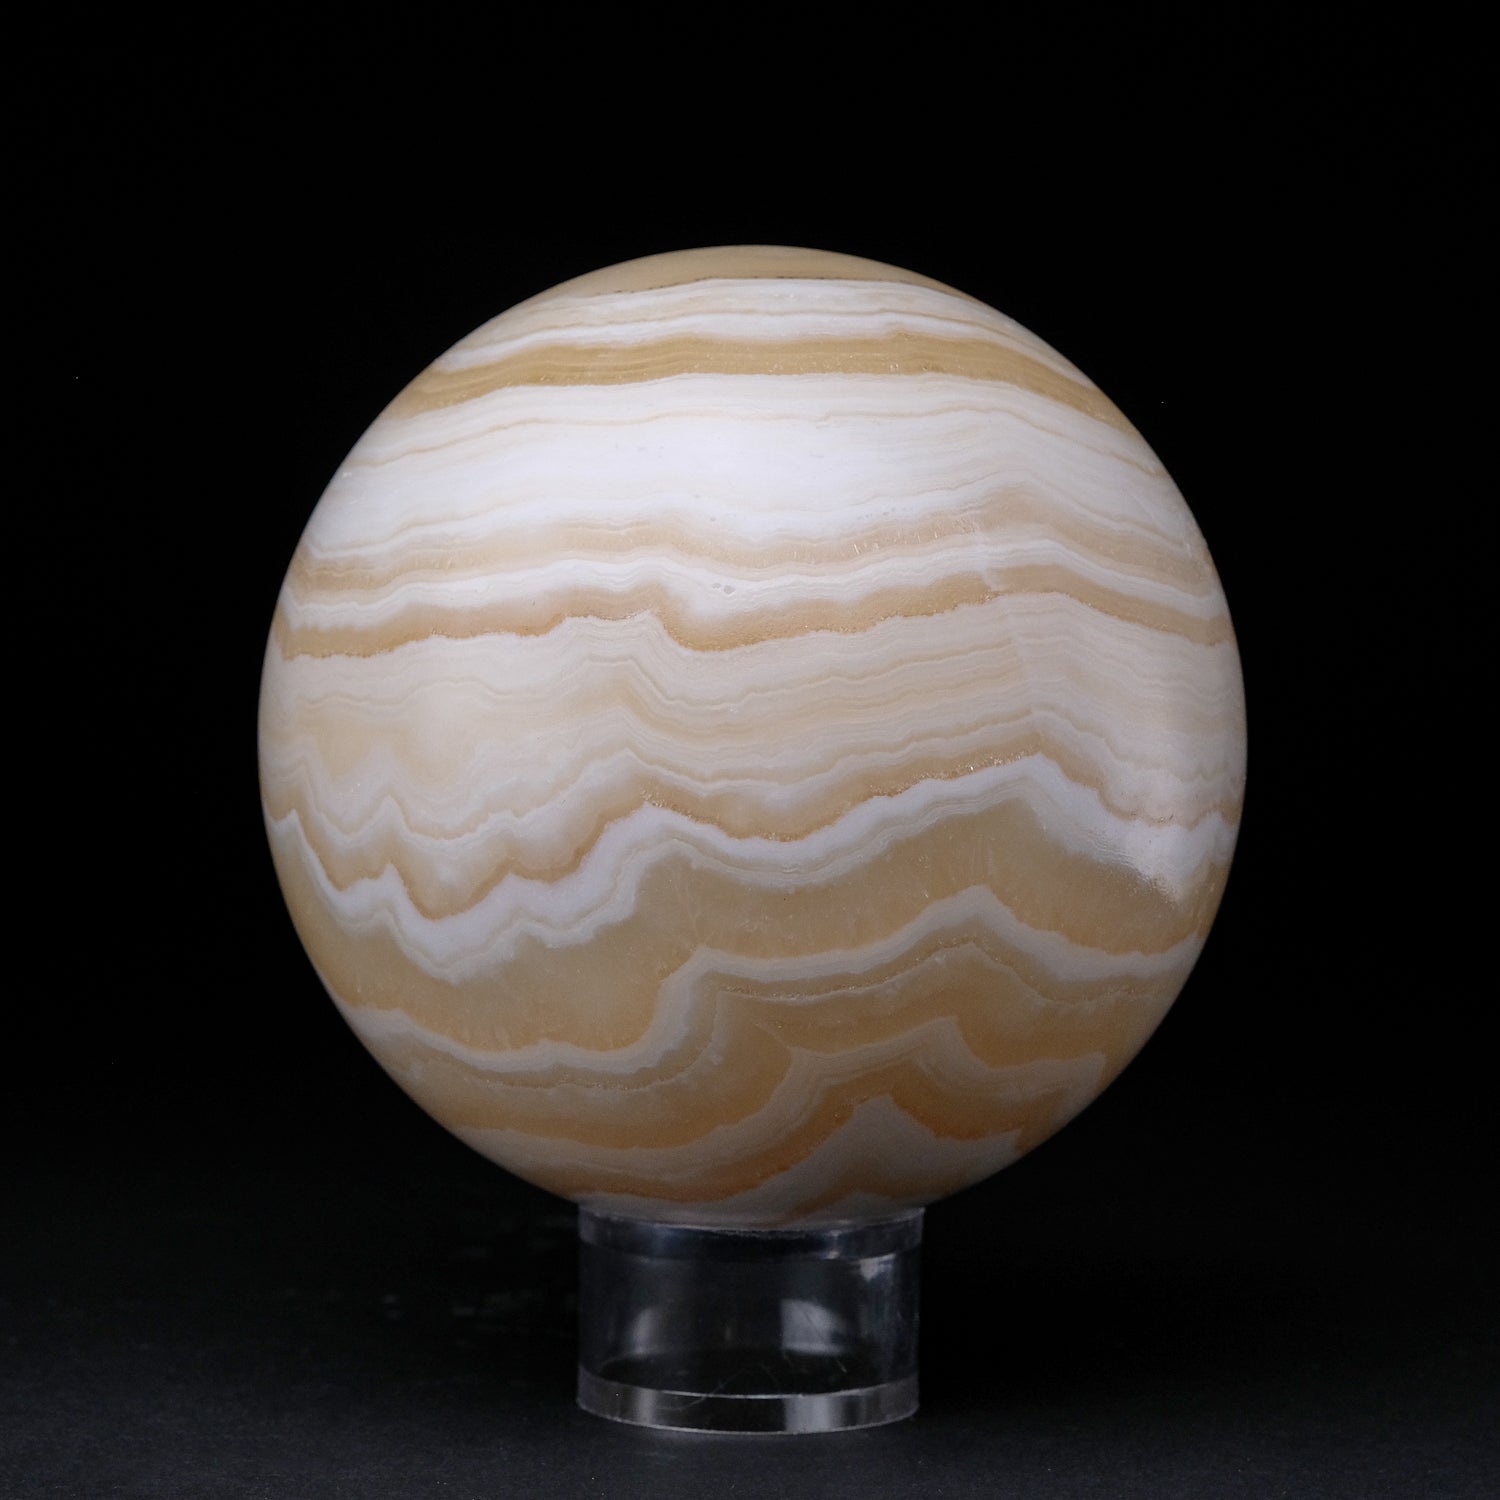 Genuine Polished Gemmy Banded Onyx Sphere from Mexico (4.9 lbs)